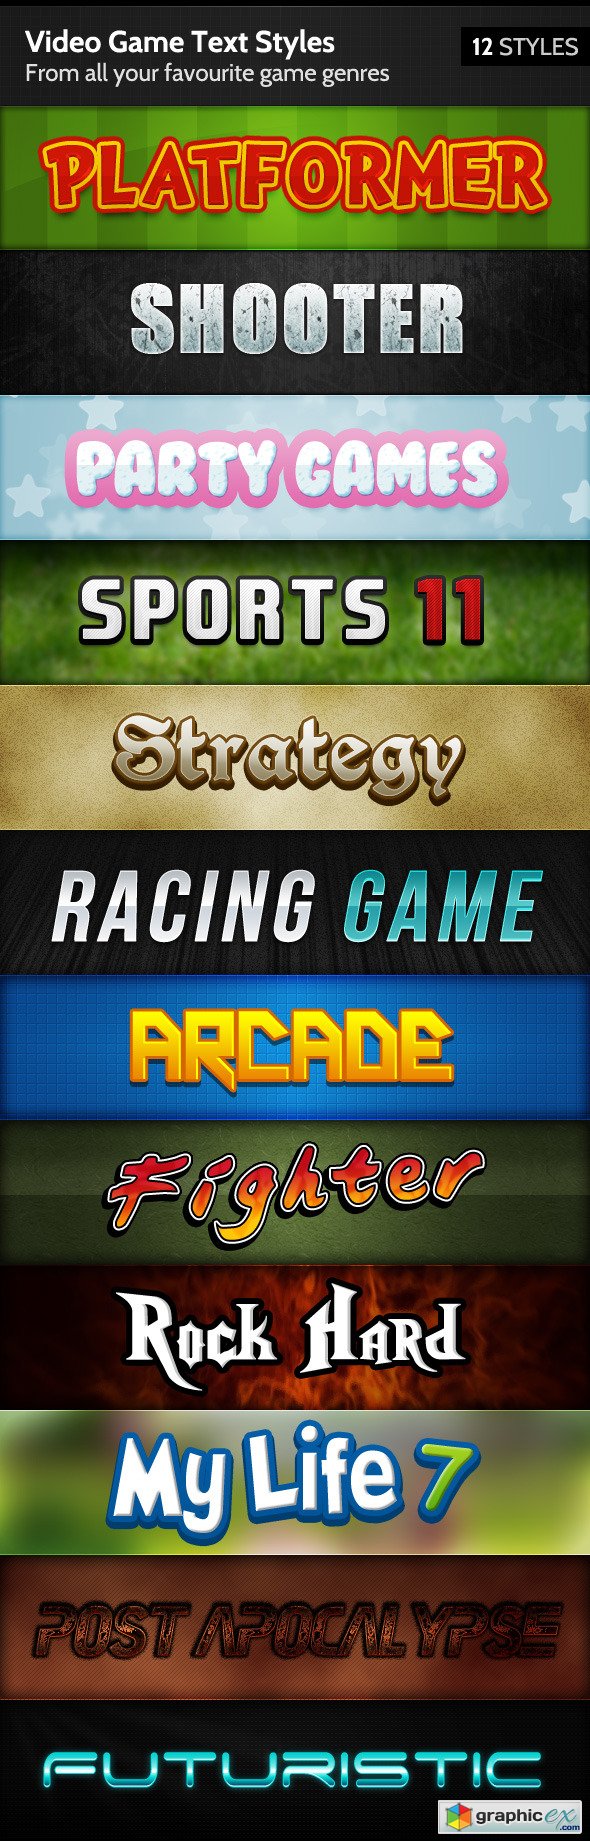 Video Game Text Styles 144135